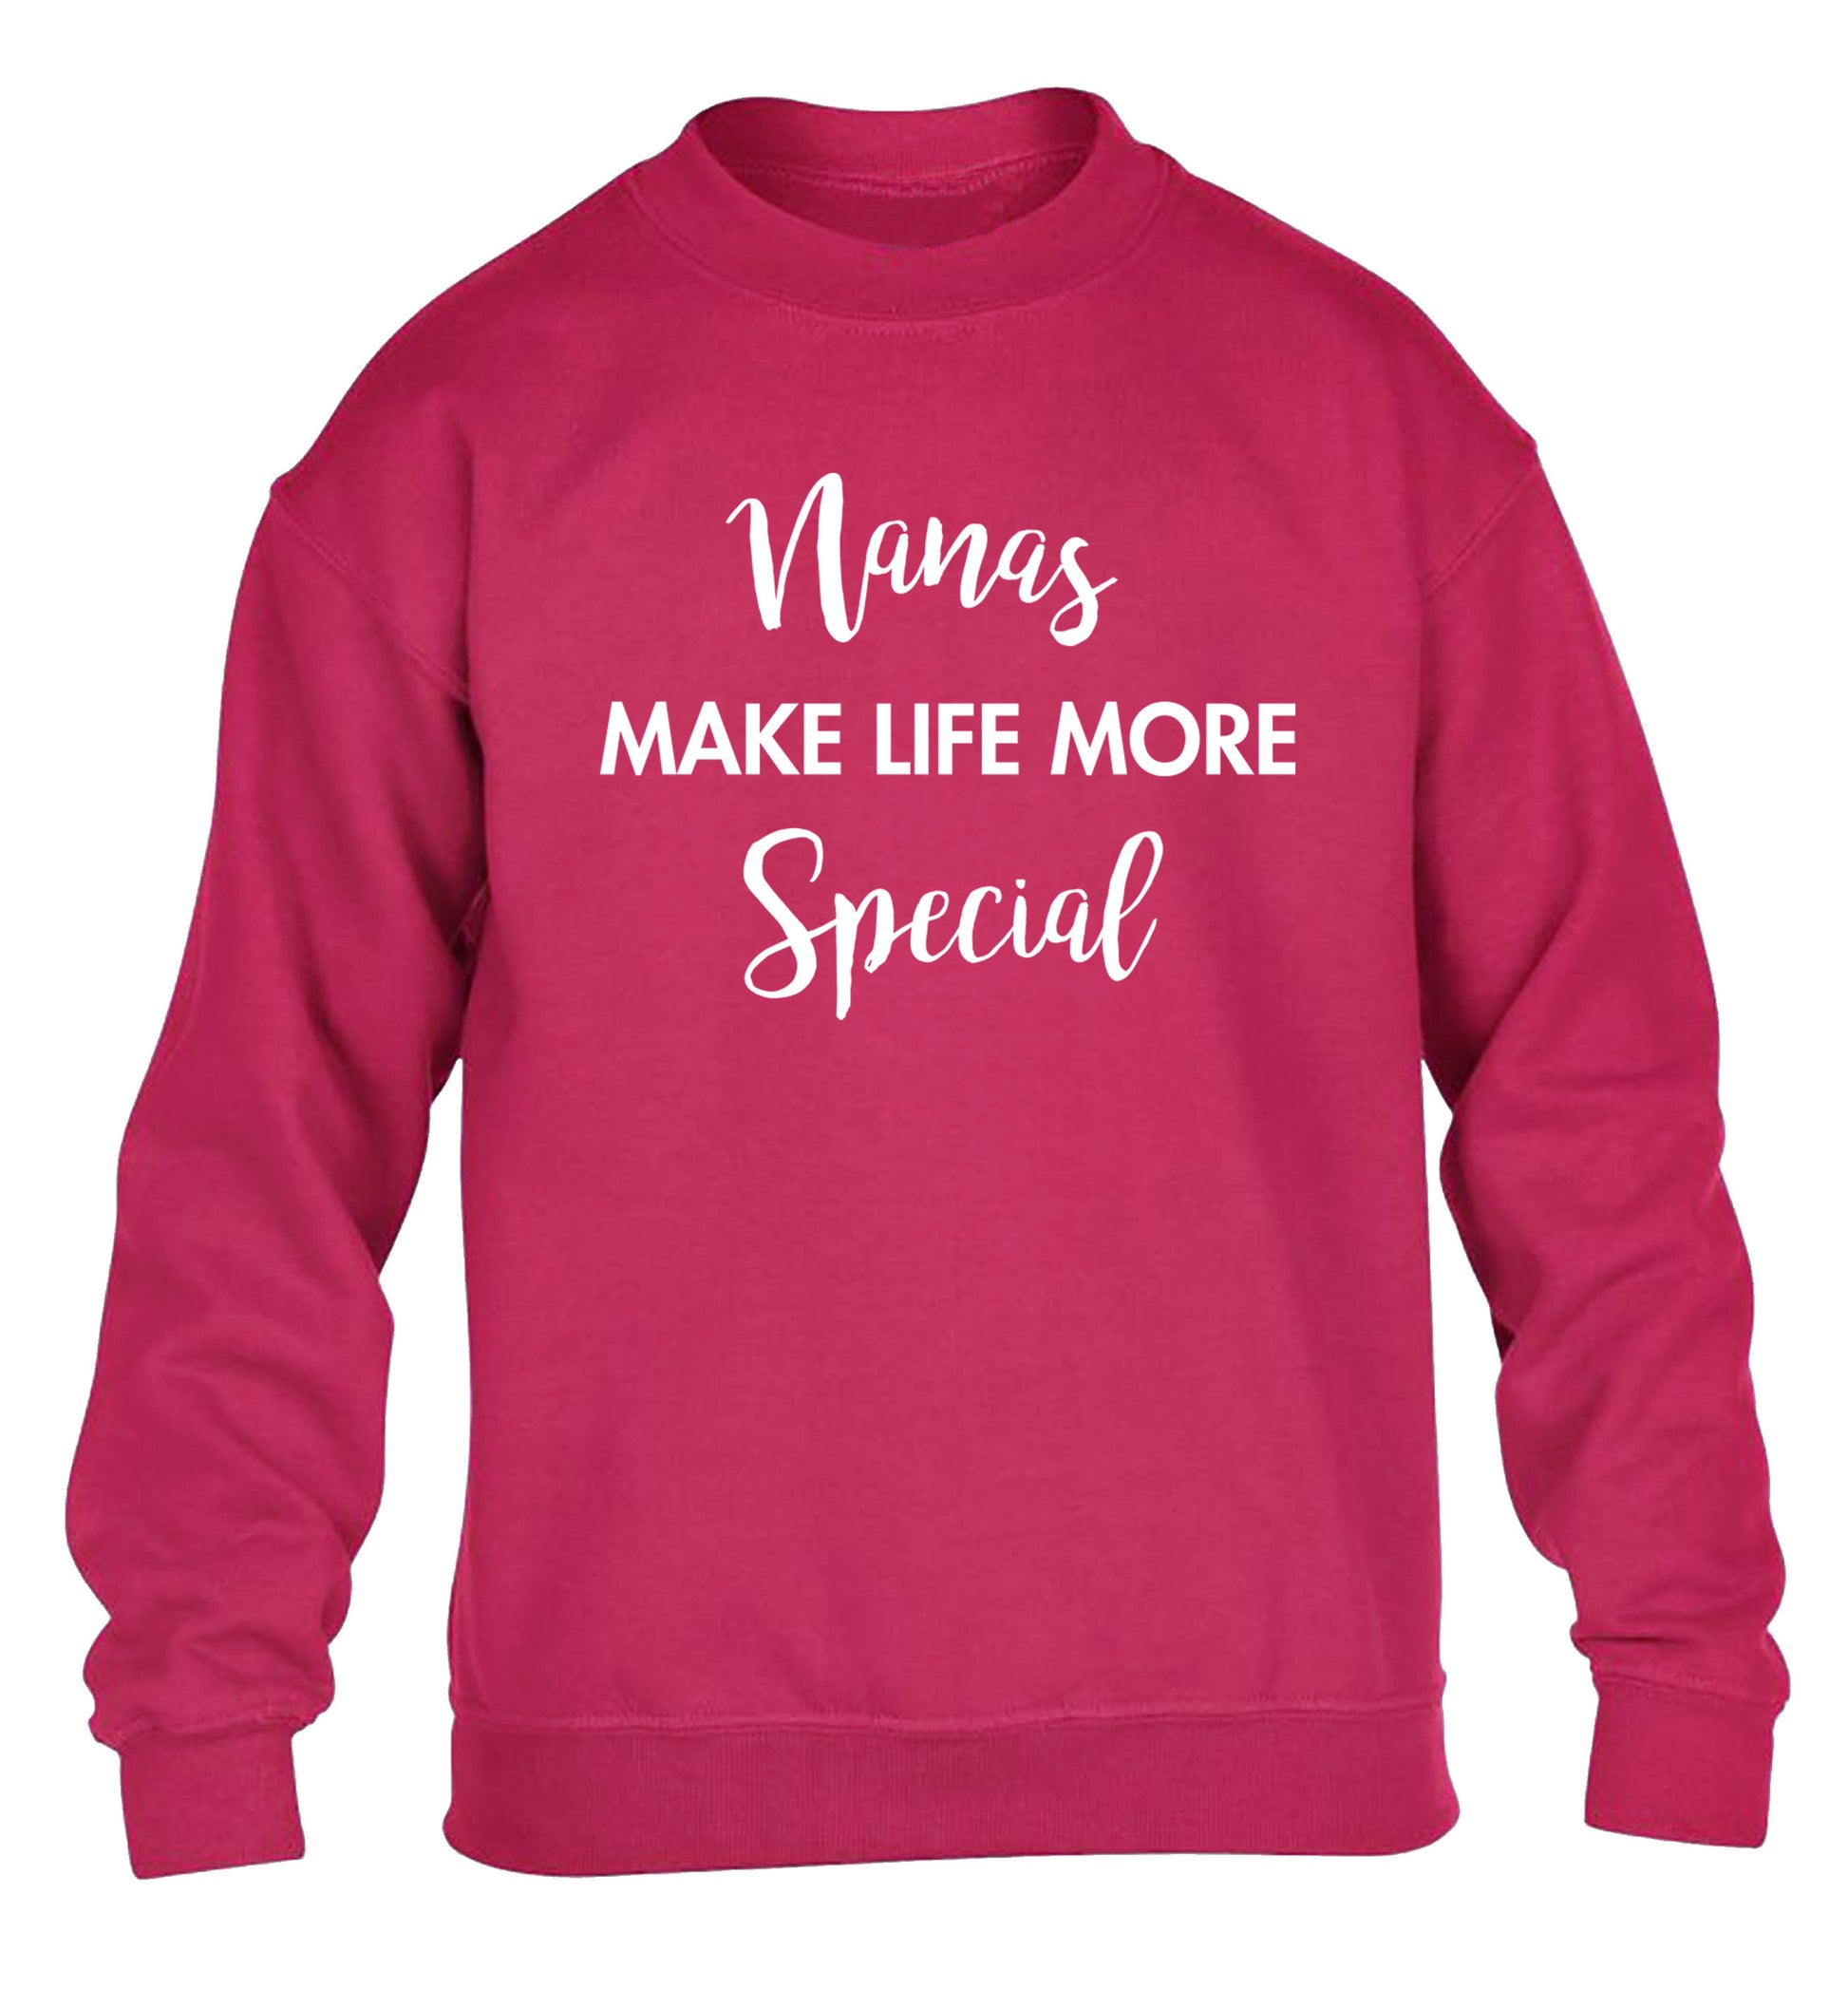 Nanas make life more special children's pink sweater 12-14 Years